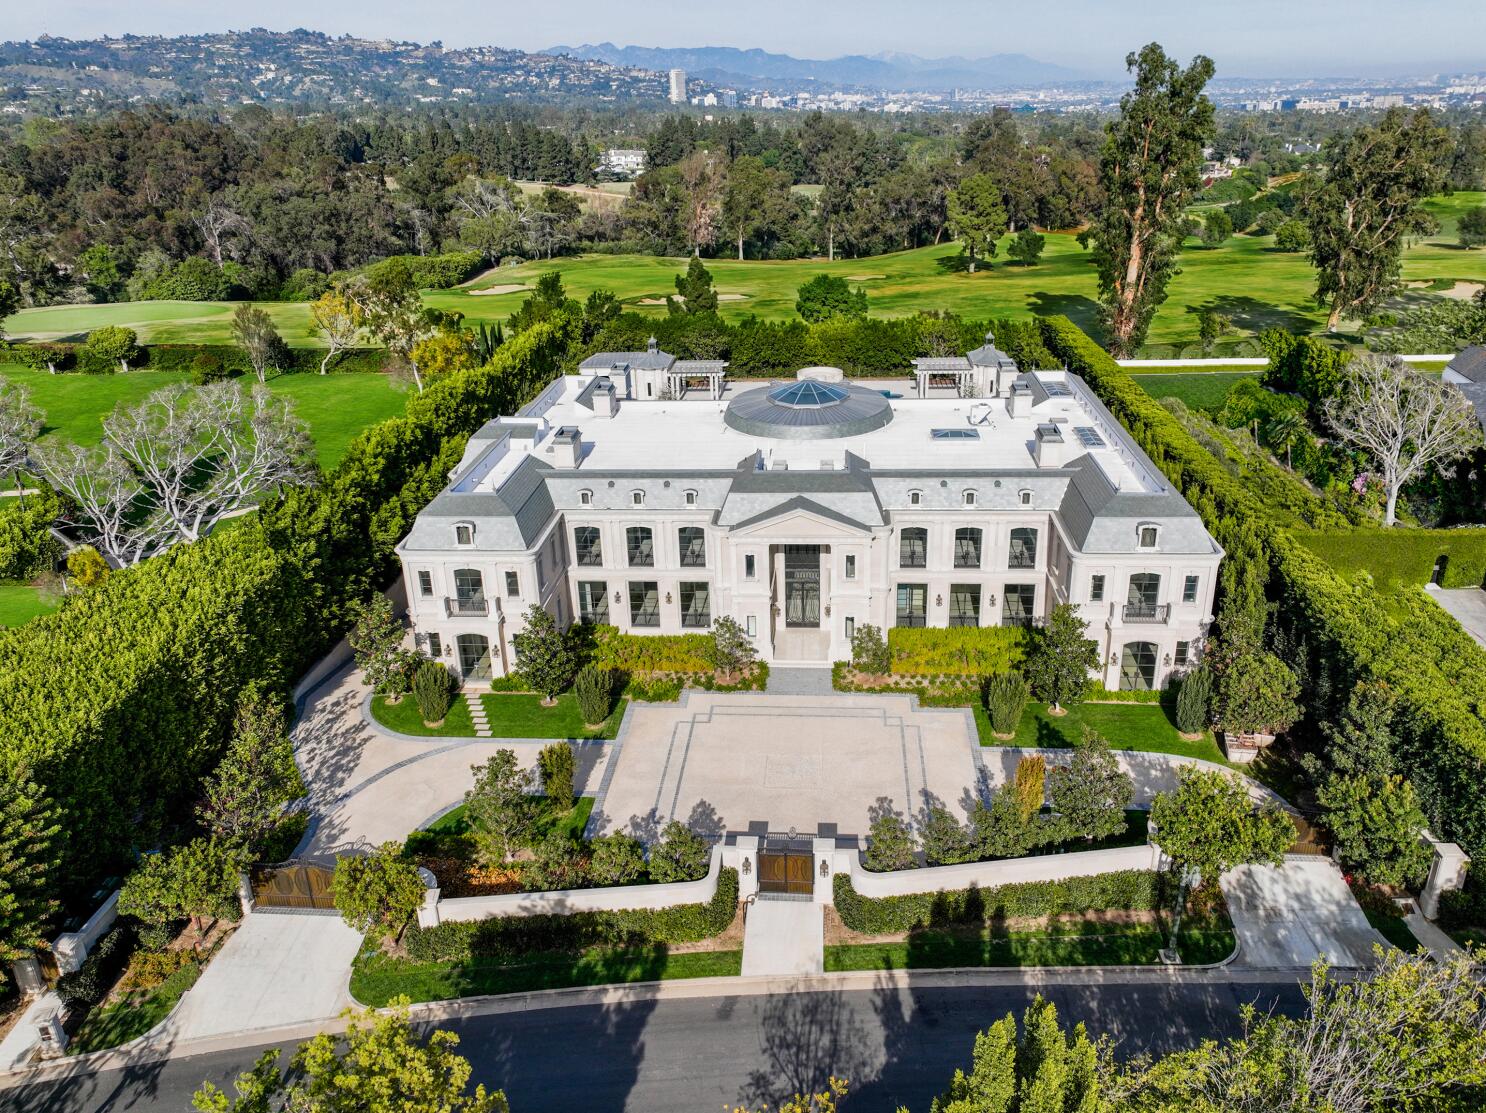 Deeply 'discounted' $295-million California mega mansion heads for auction  - National